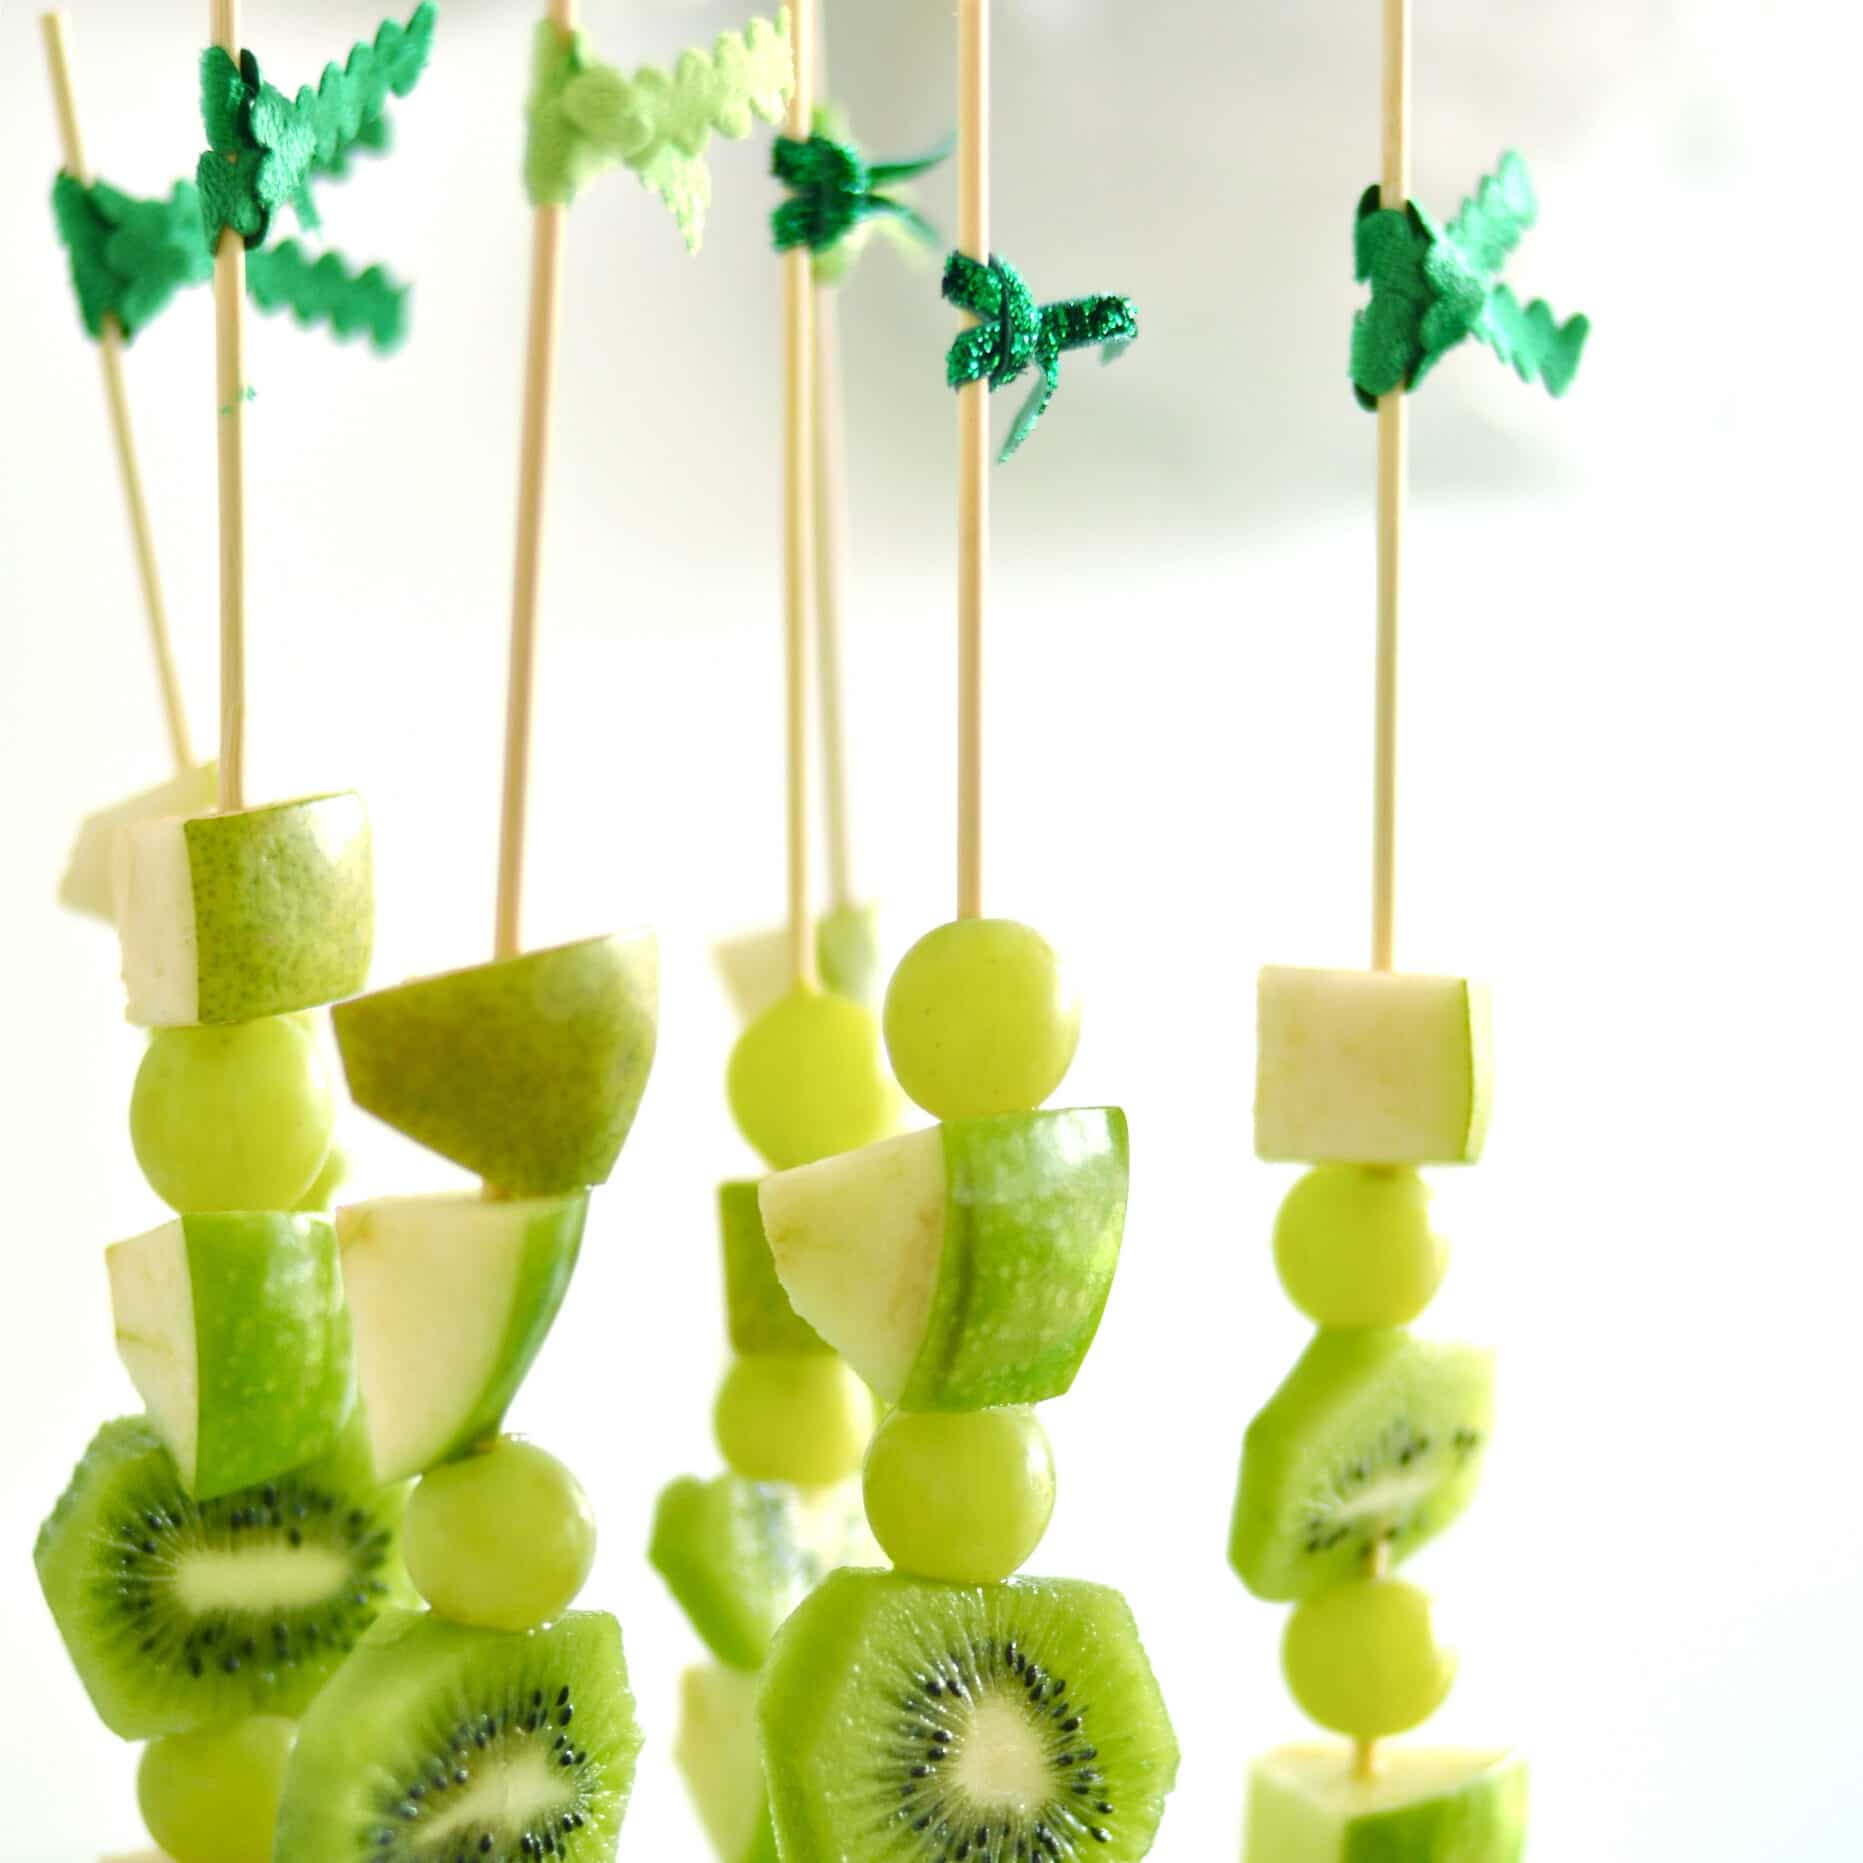 St. Patrick's Day ideas don't get greener than a fruit skewer for your party guests | The Dating Divas